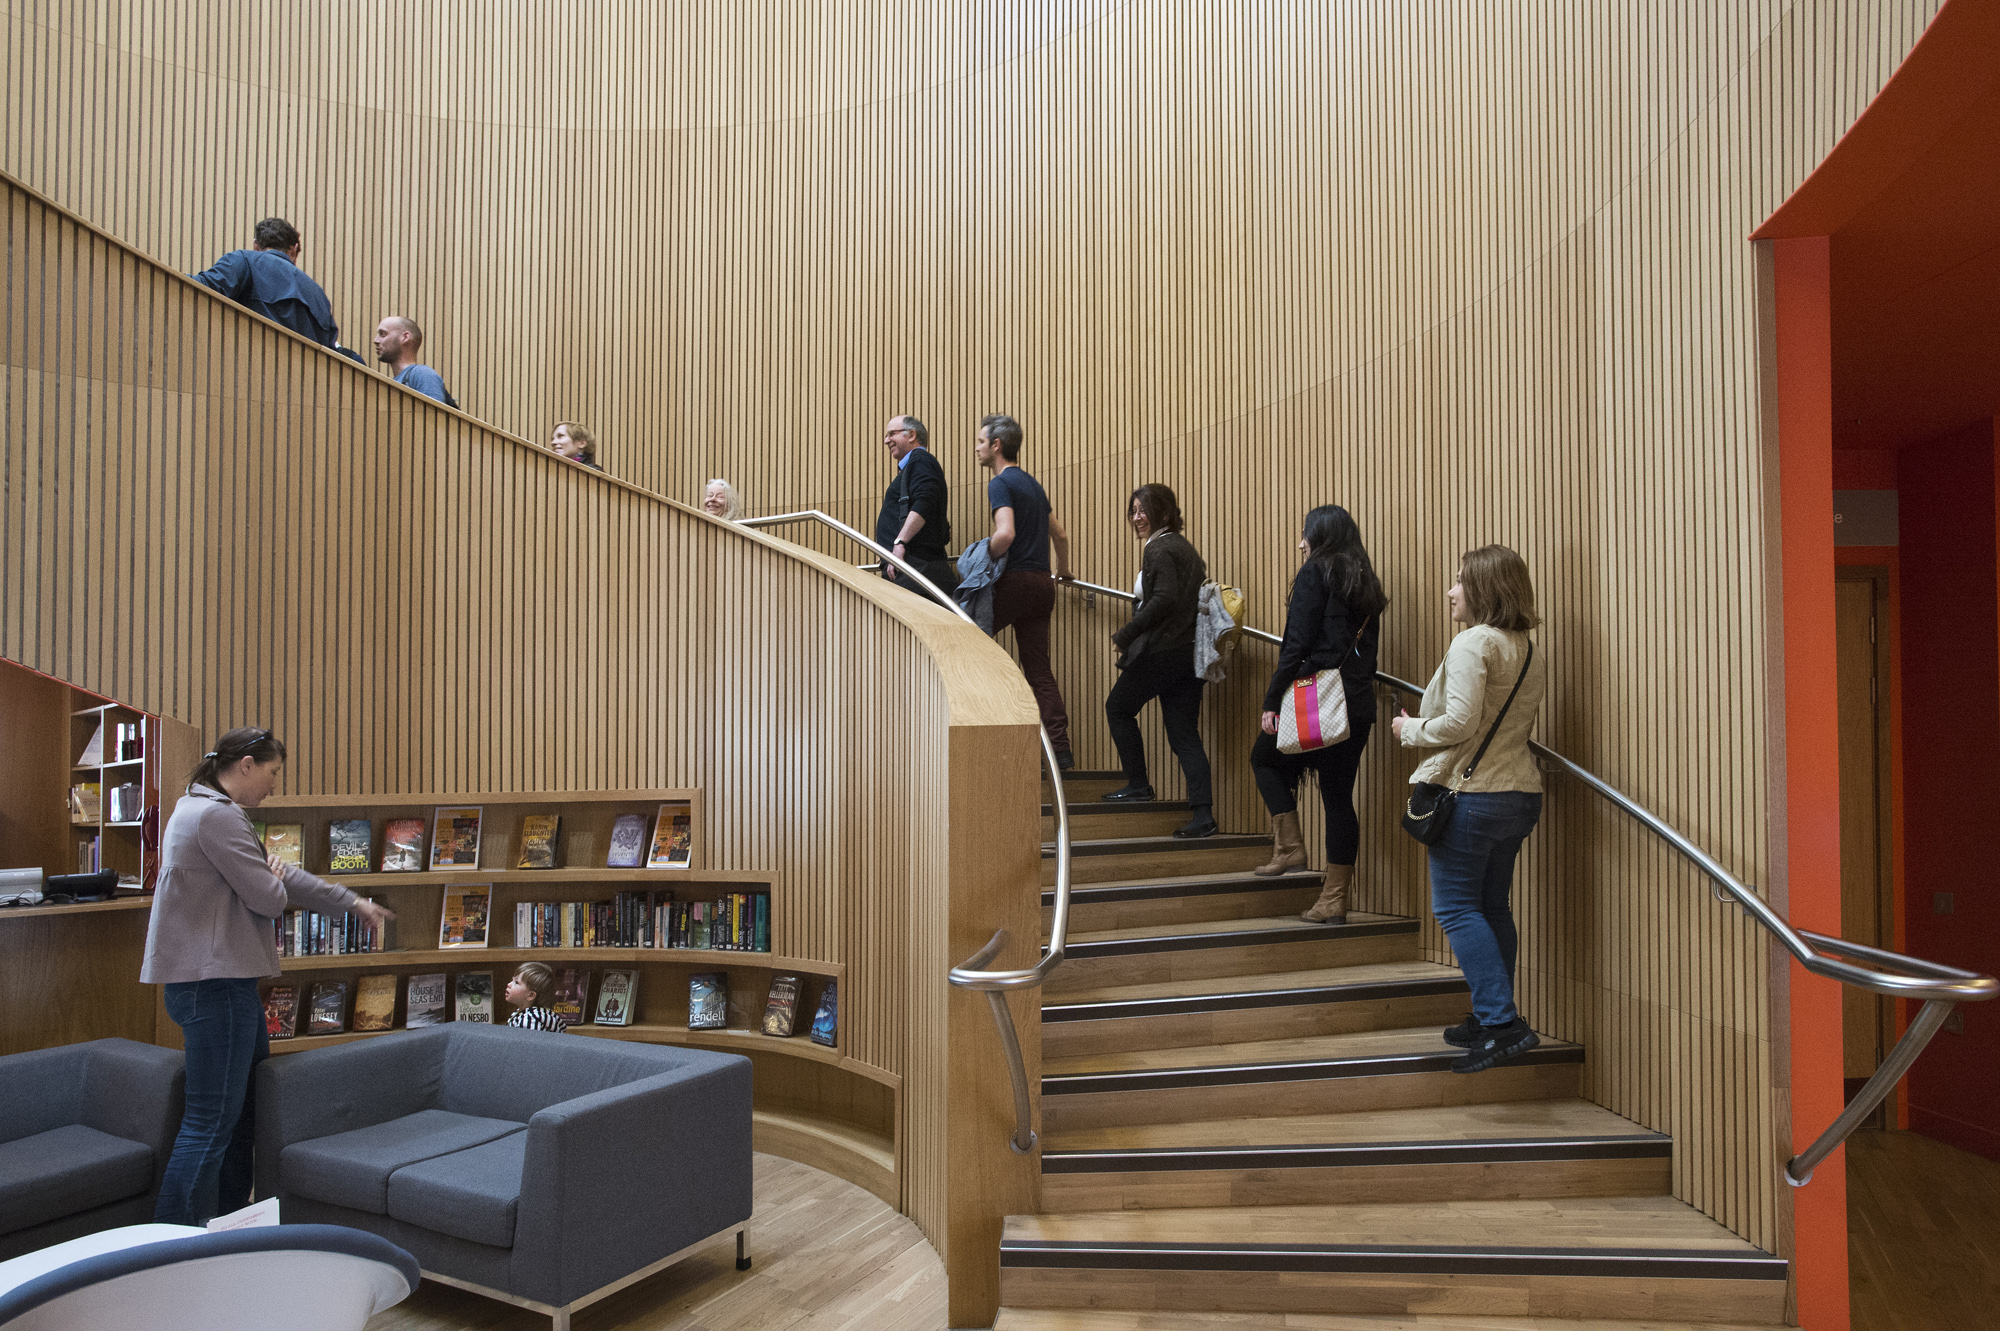 Tour of Canada Water Library by Piers Gough